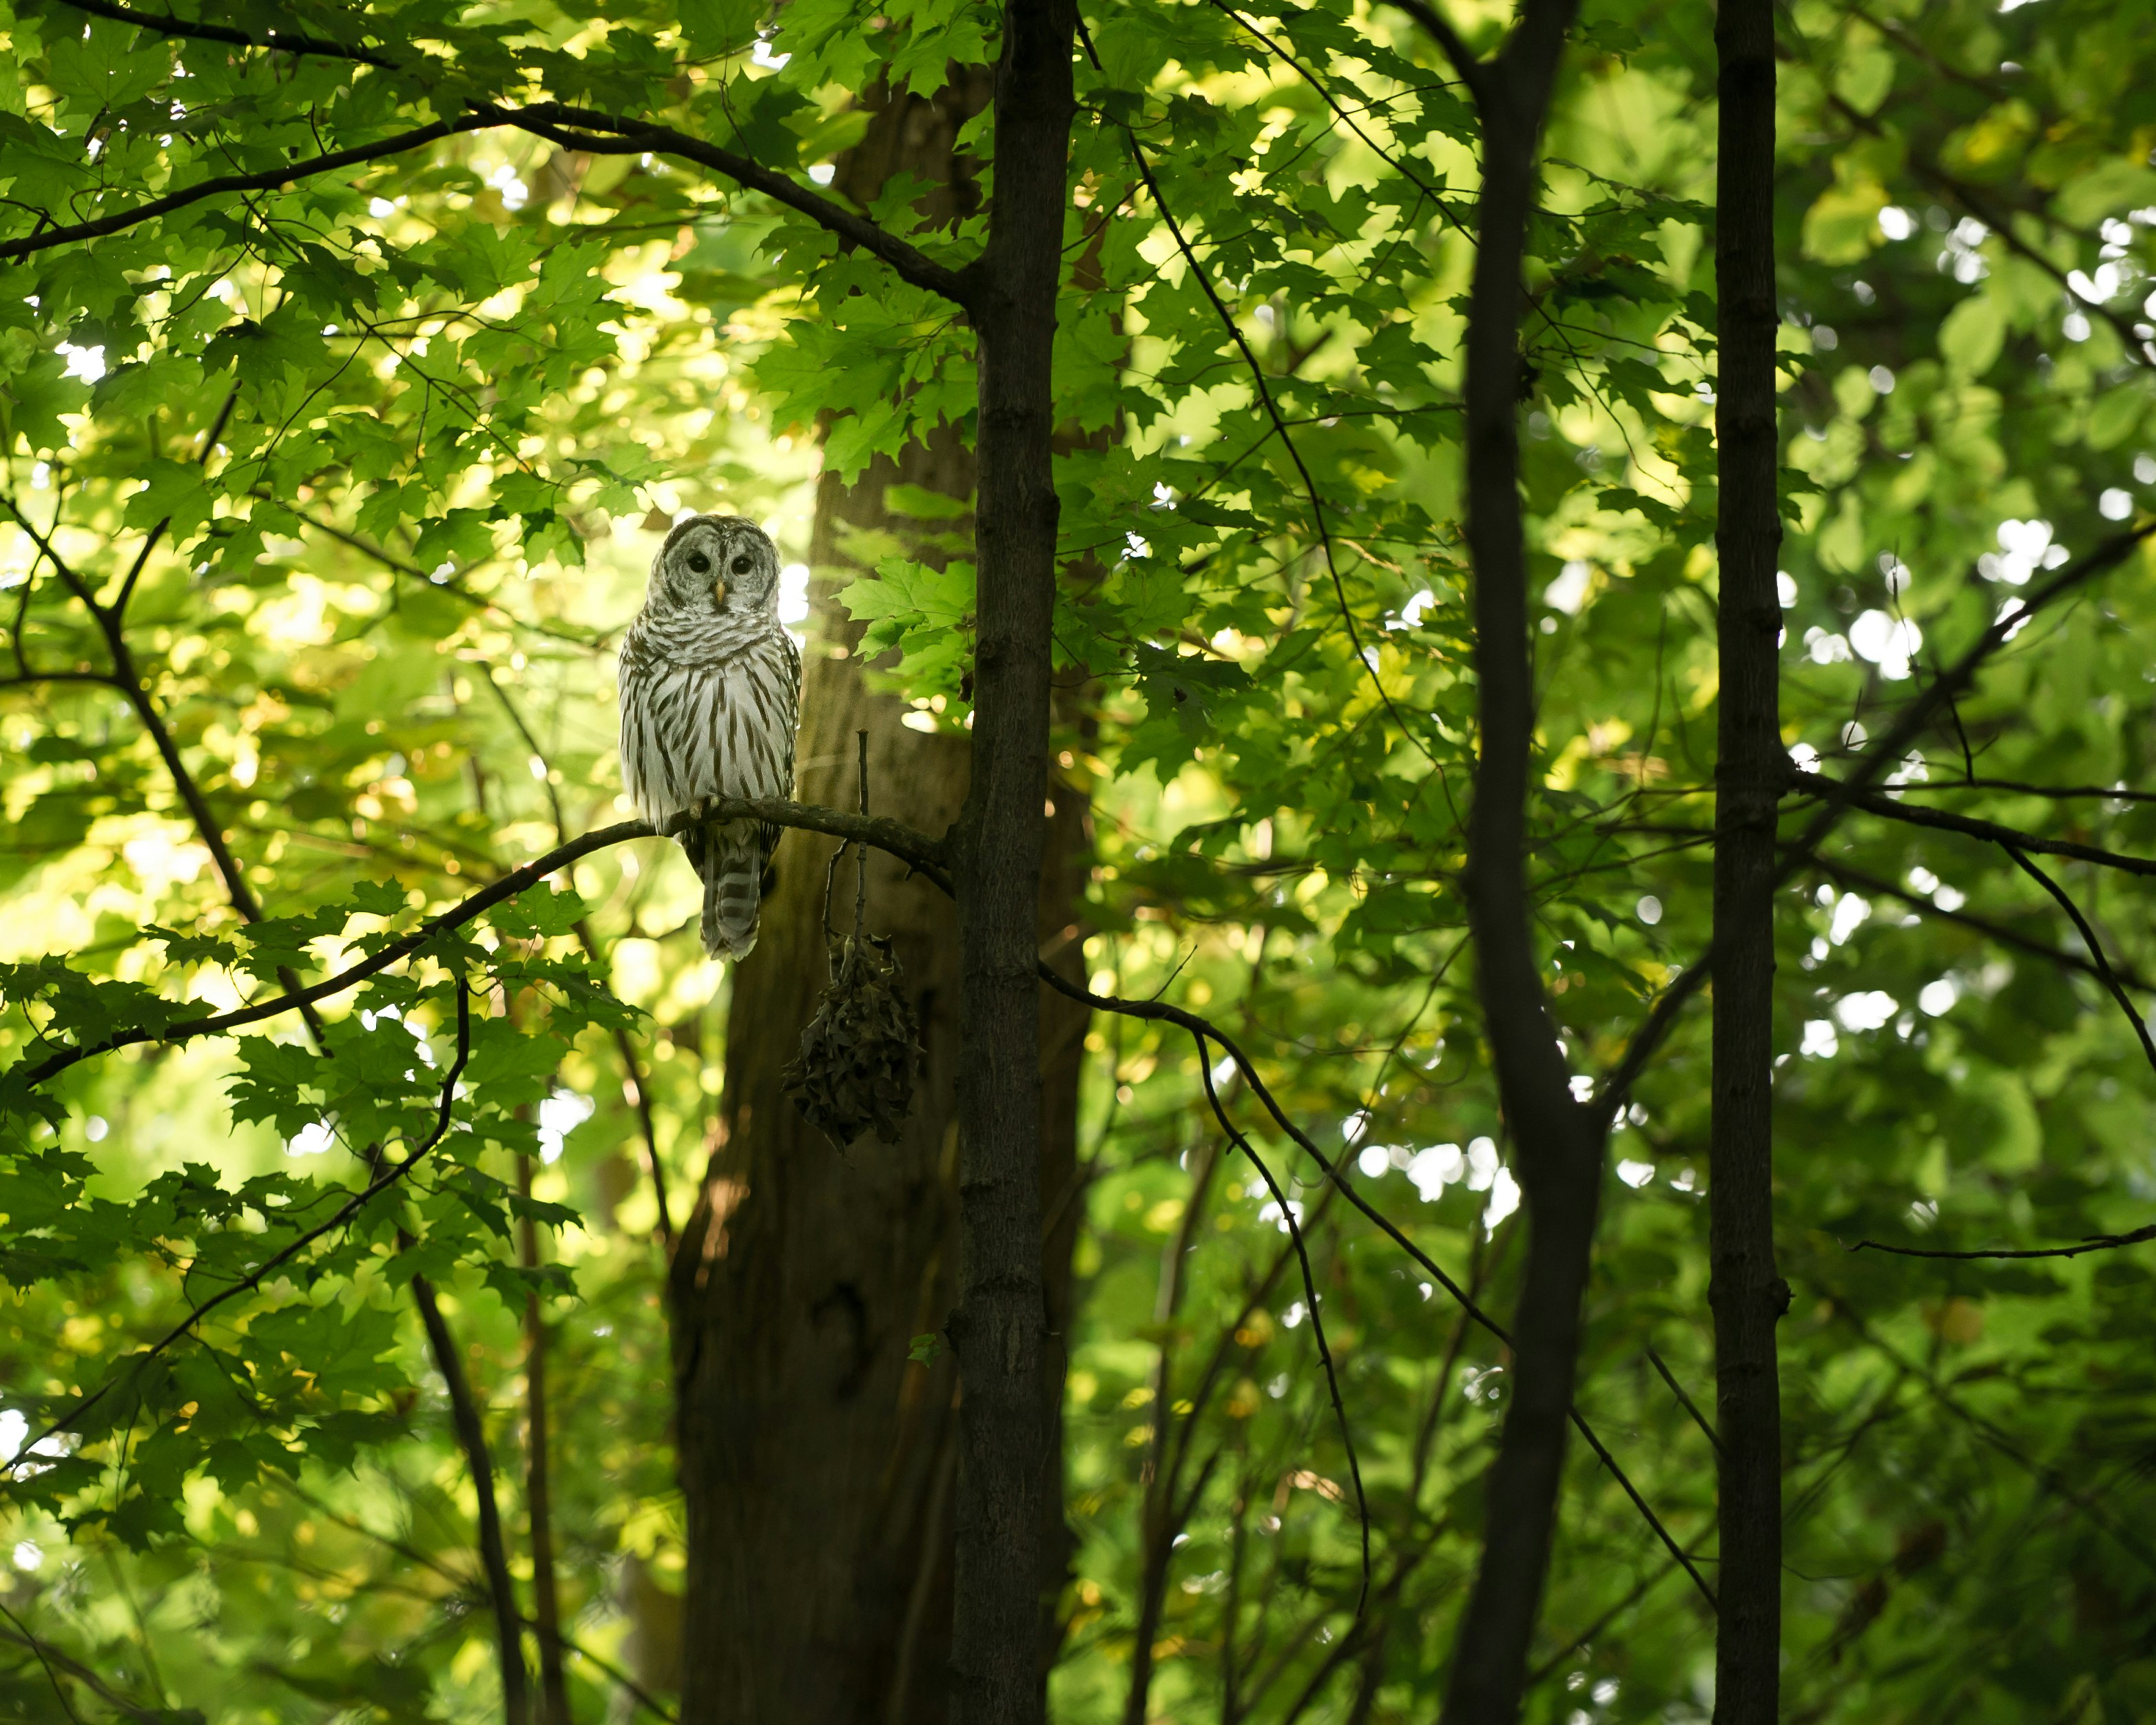 I was taking Senior photos in the woods when I noticed this little fella staring right at us! Good thing I had my long lens!